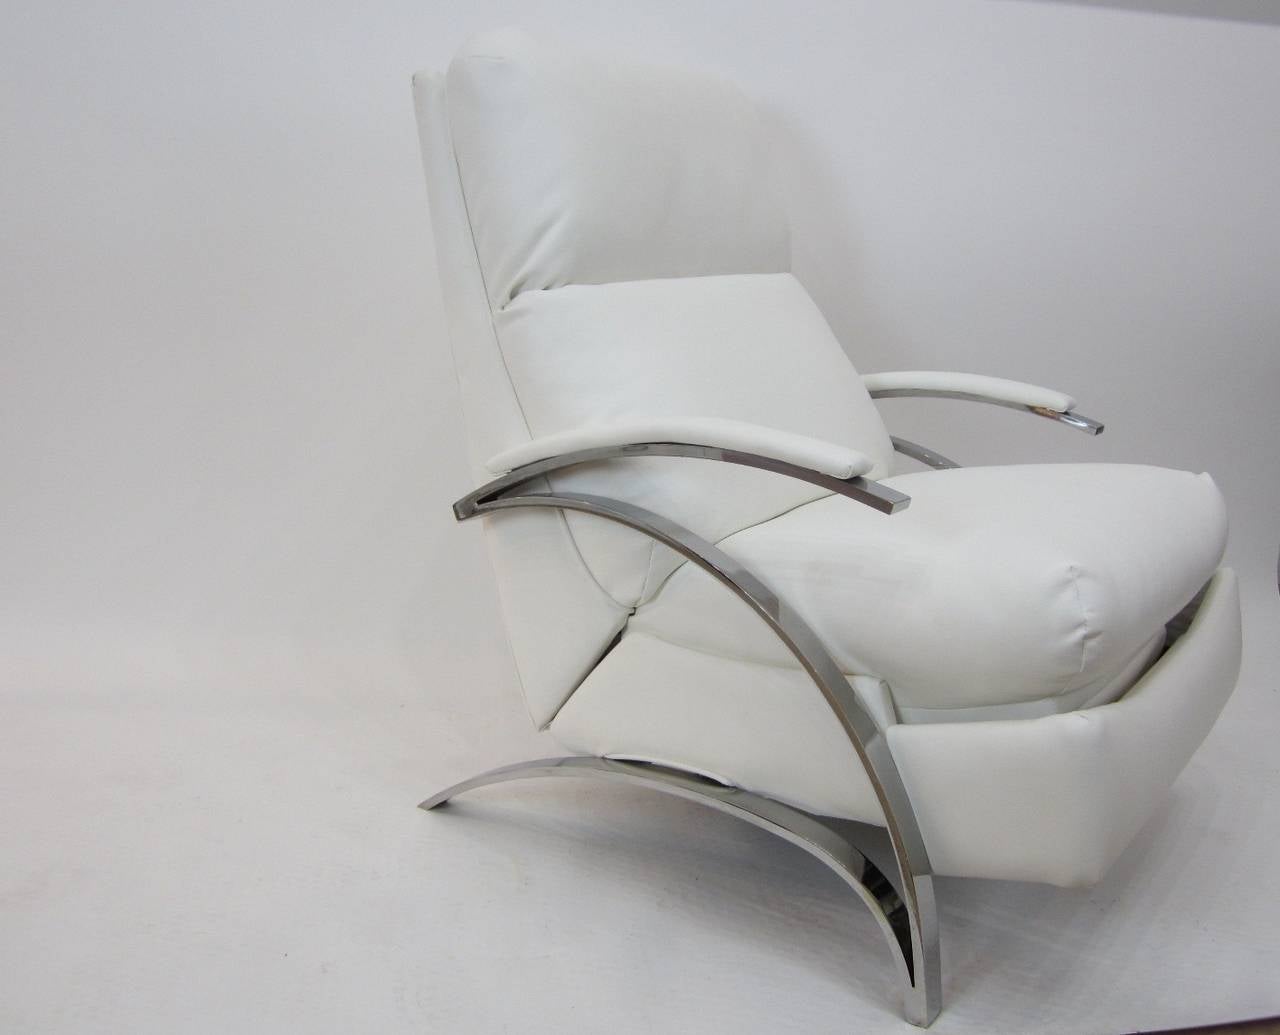 Wonderful reclining lounge chair with sculptural polished steel frame and white faux leather upholstery. The flat steel frame is solid, thick, and heavy and has been polished and shows a little natural wear--no pitting. The upholstery is newly done